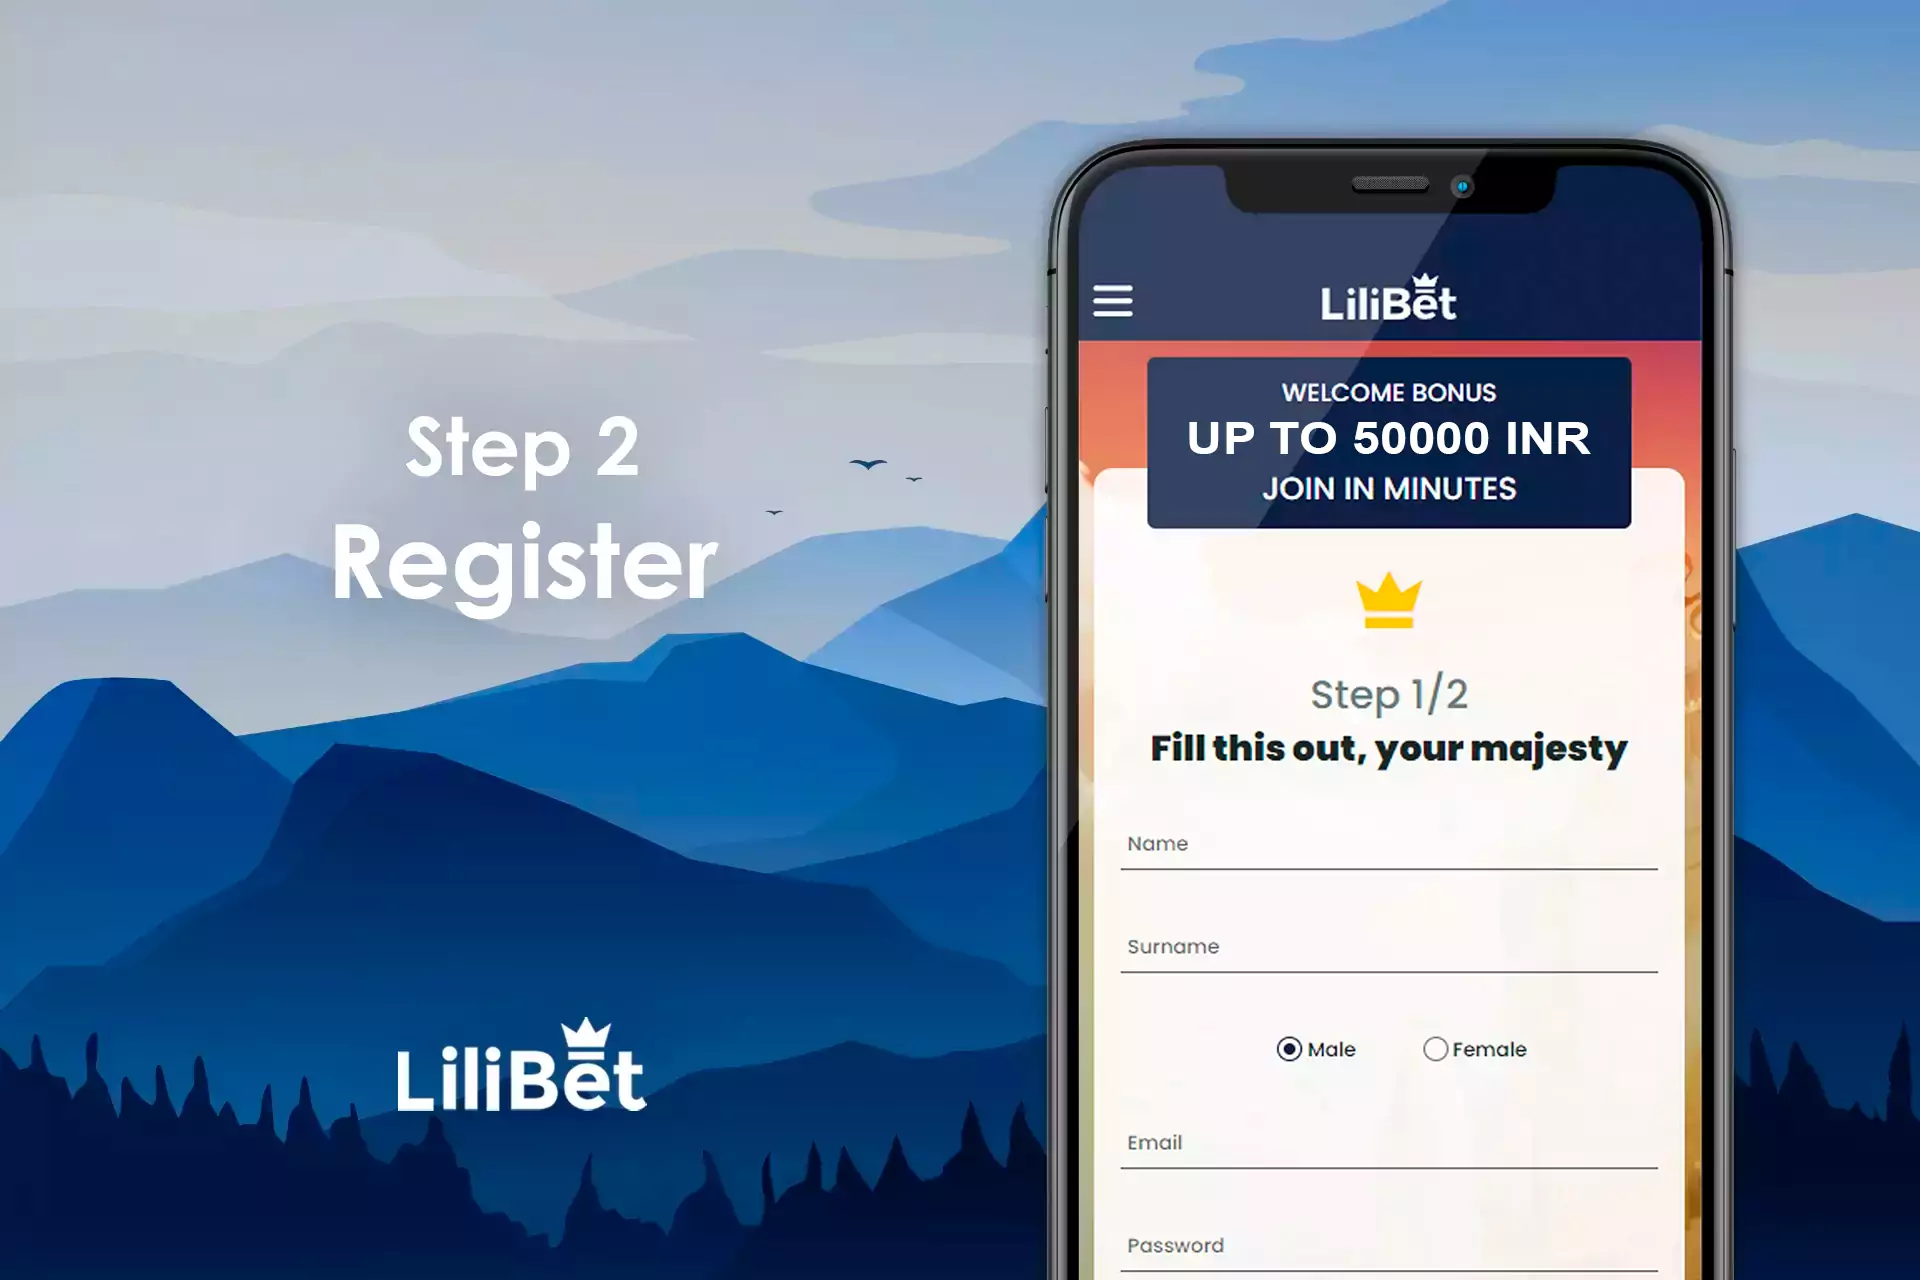 Go to the site of Lilibet and create a new account.